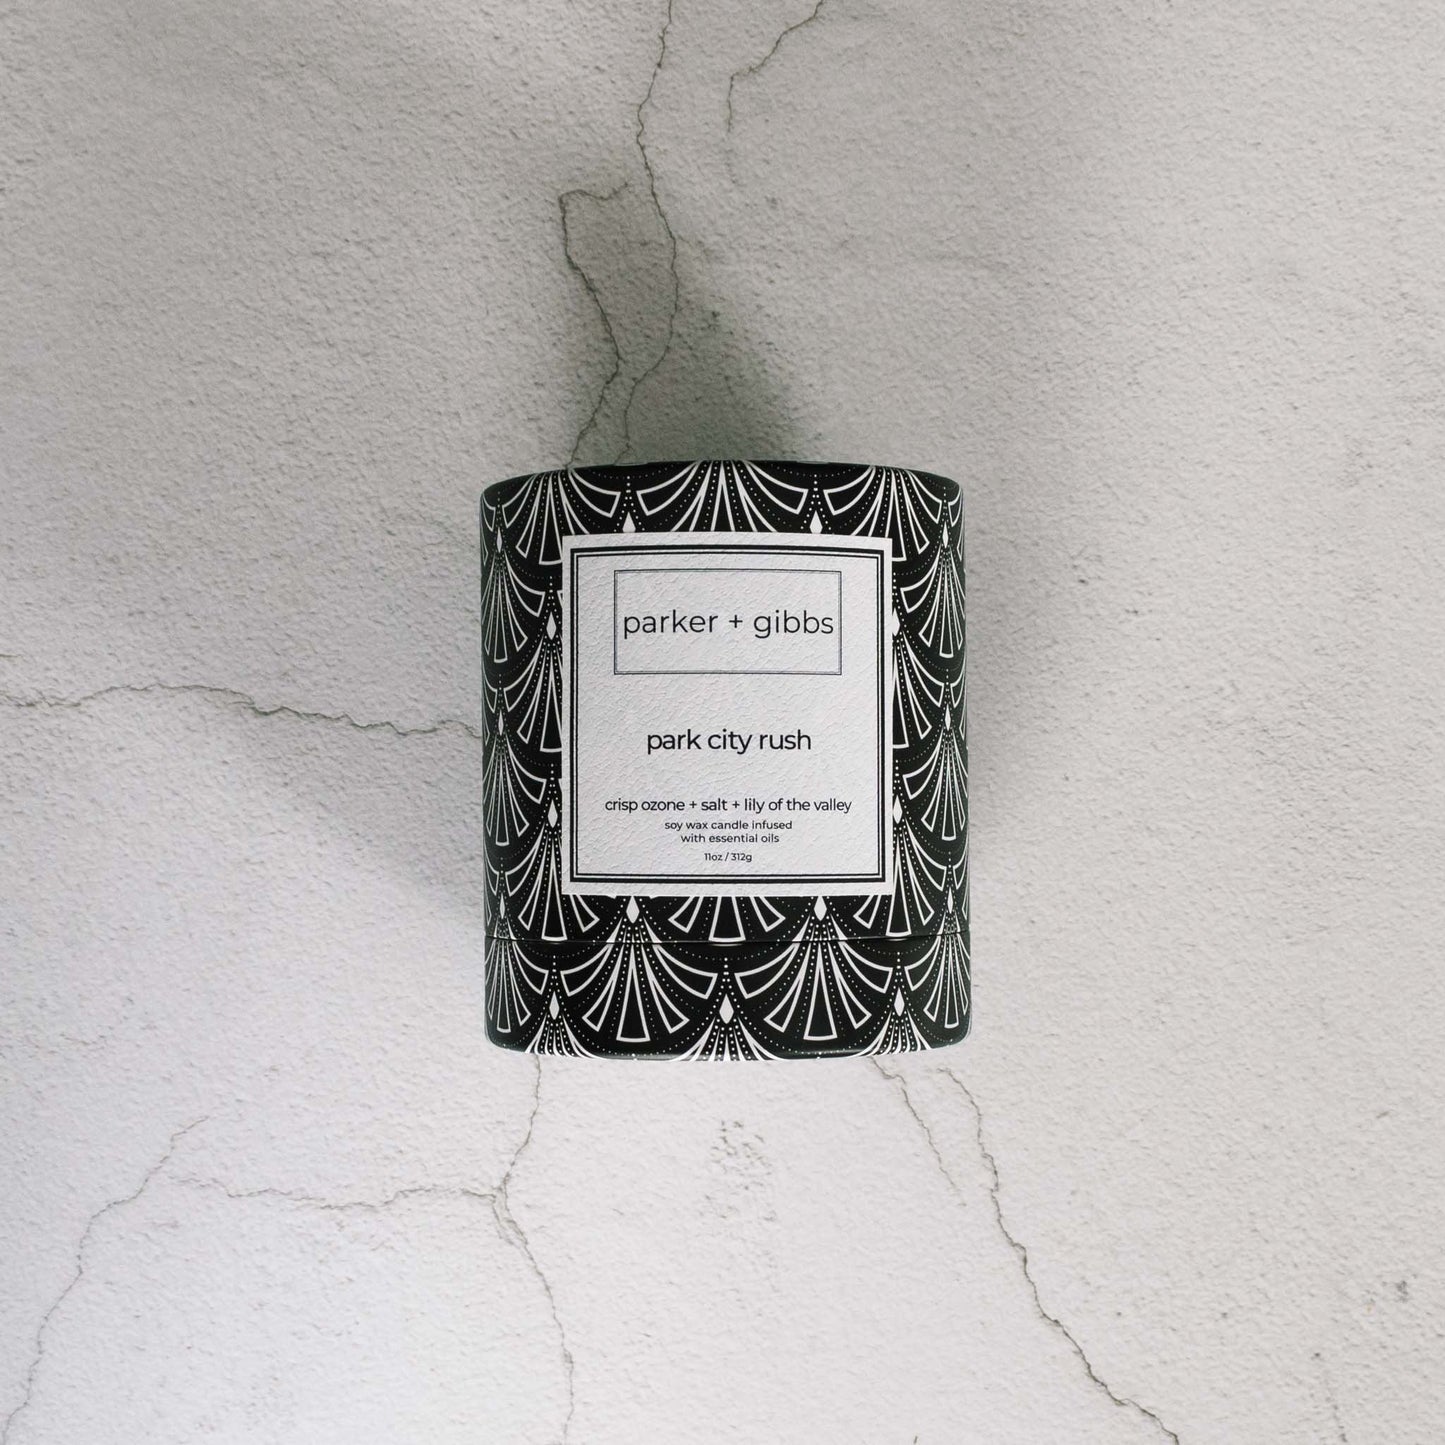 Luxury scented soy wax blend Park City Rush candle box on limestone table.